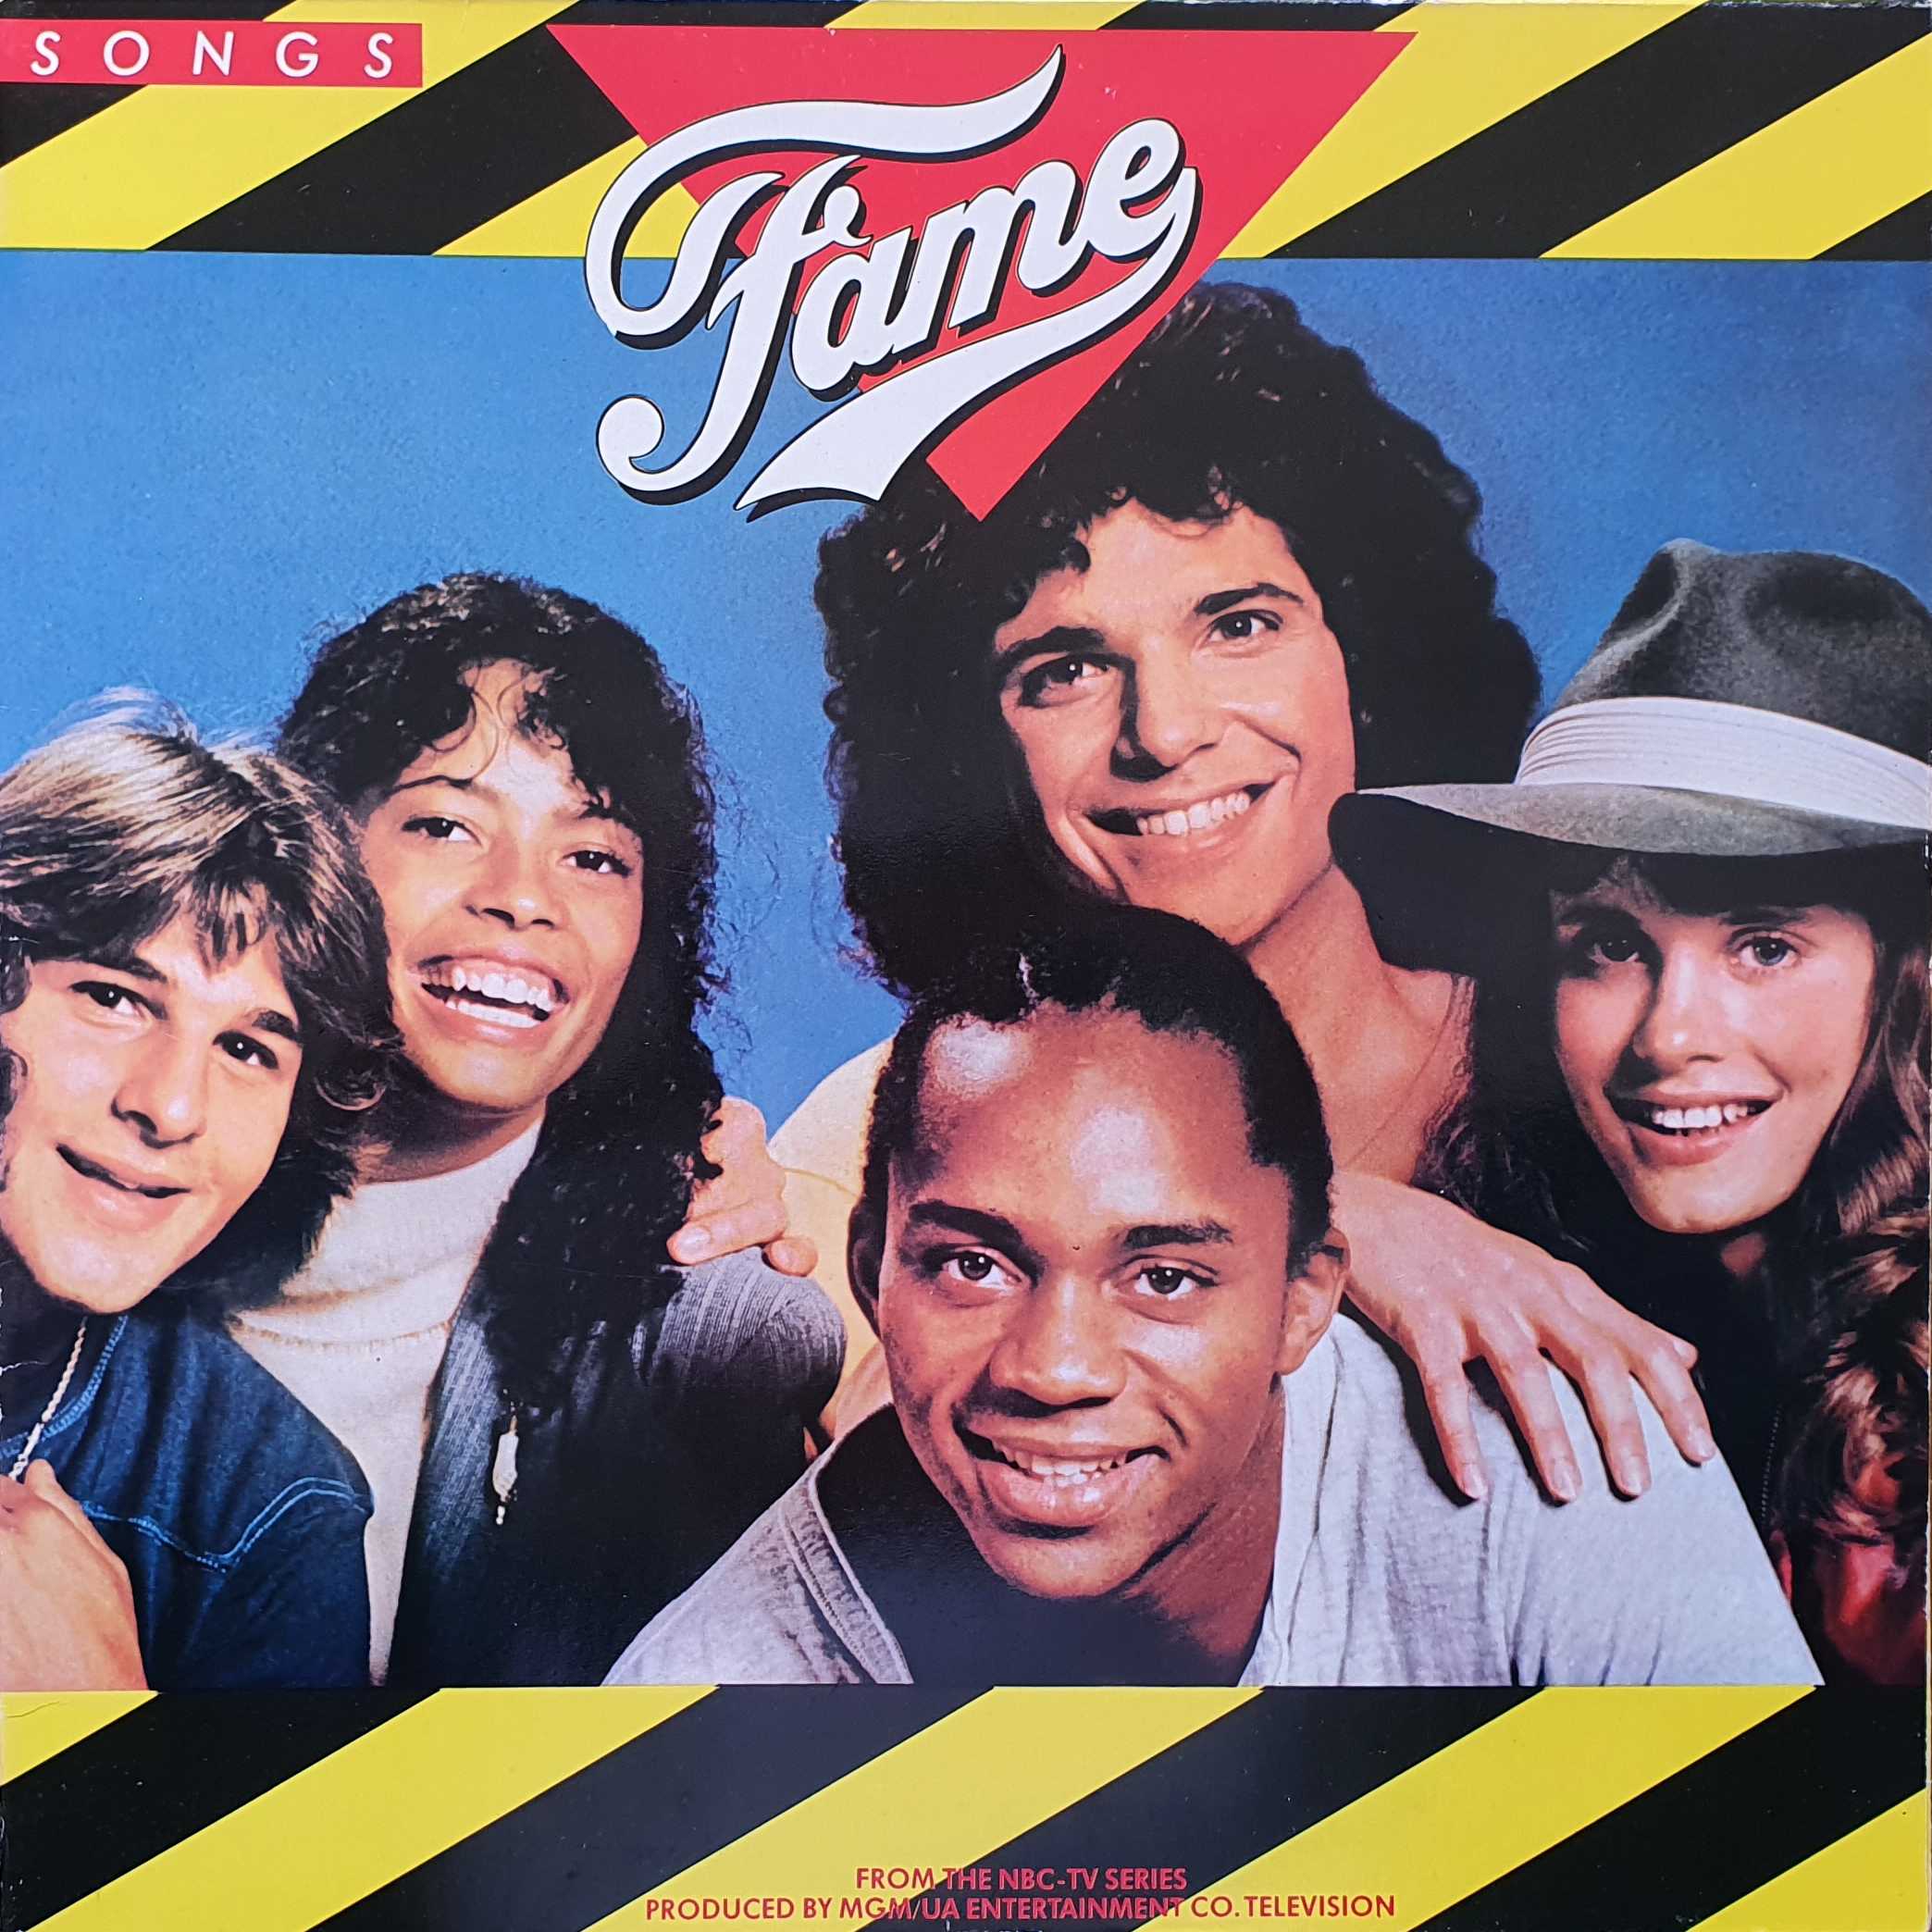 Picture of MAL-RCLP 20267 The kids from fame (Dutch import) by artist Various from the BBC albums - Records and Tapes library